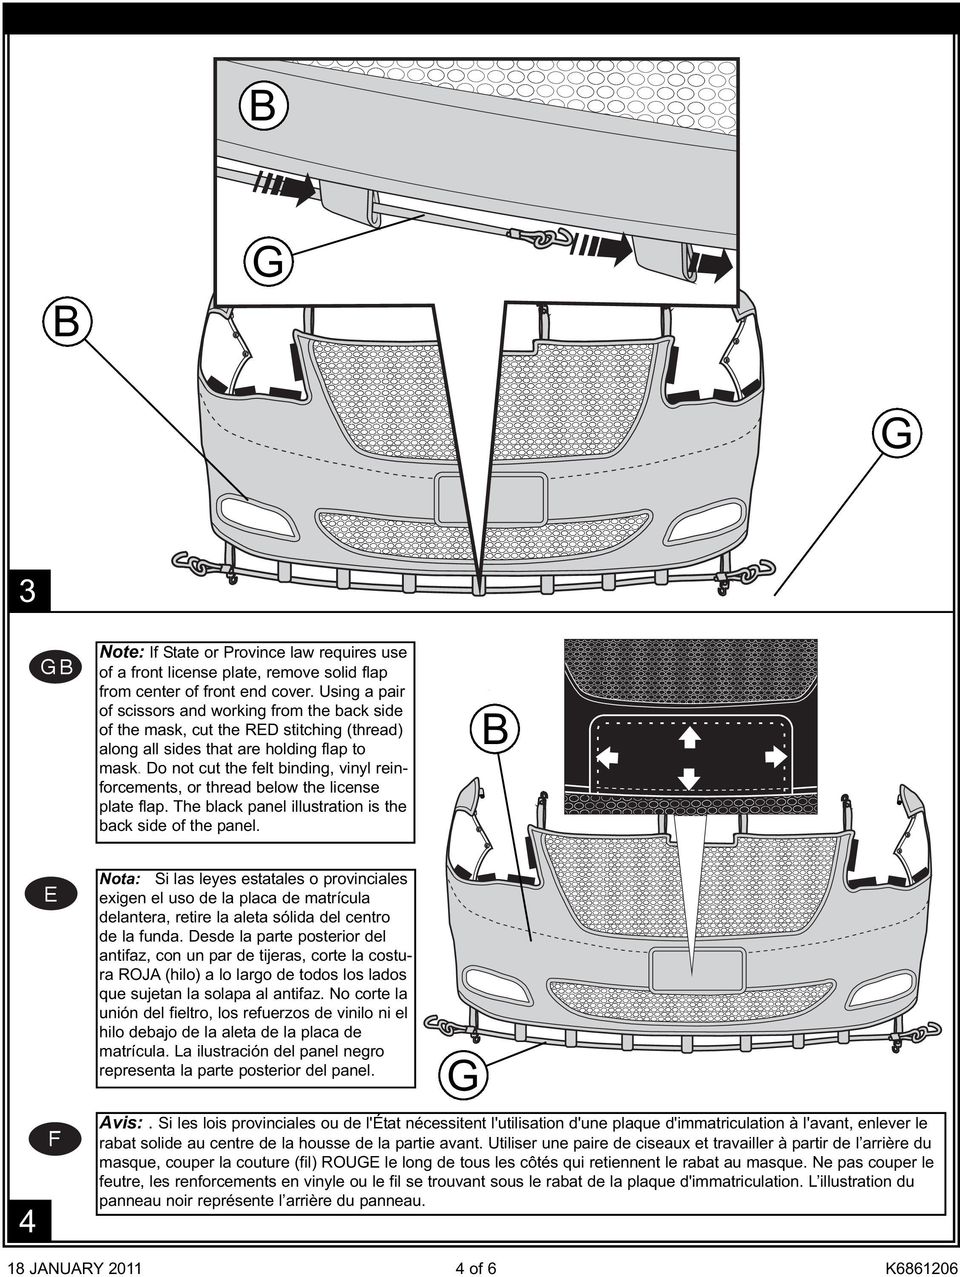 Do not cut the felt binding, vinyl reinforcements, or thread below the license plate flap. The black panel illustration is the back side of the panel.